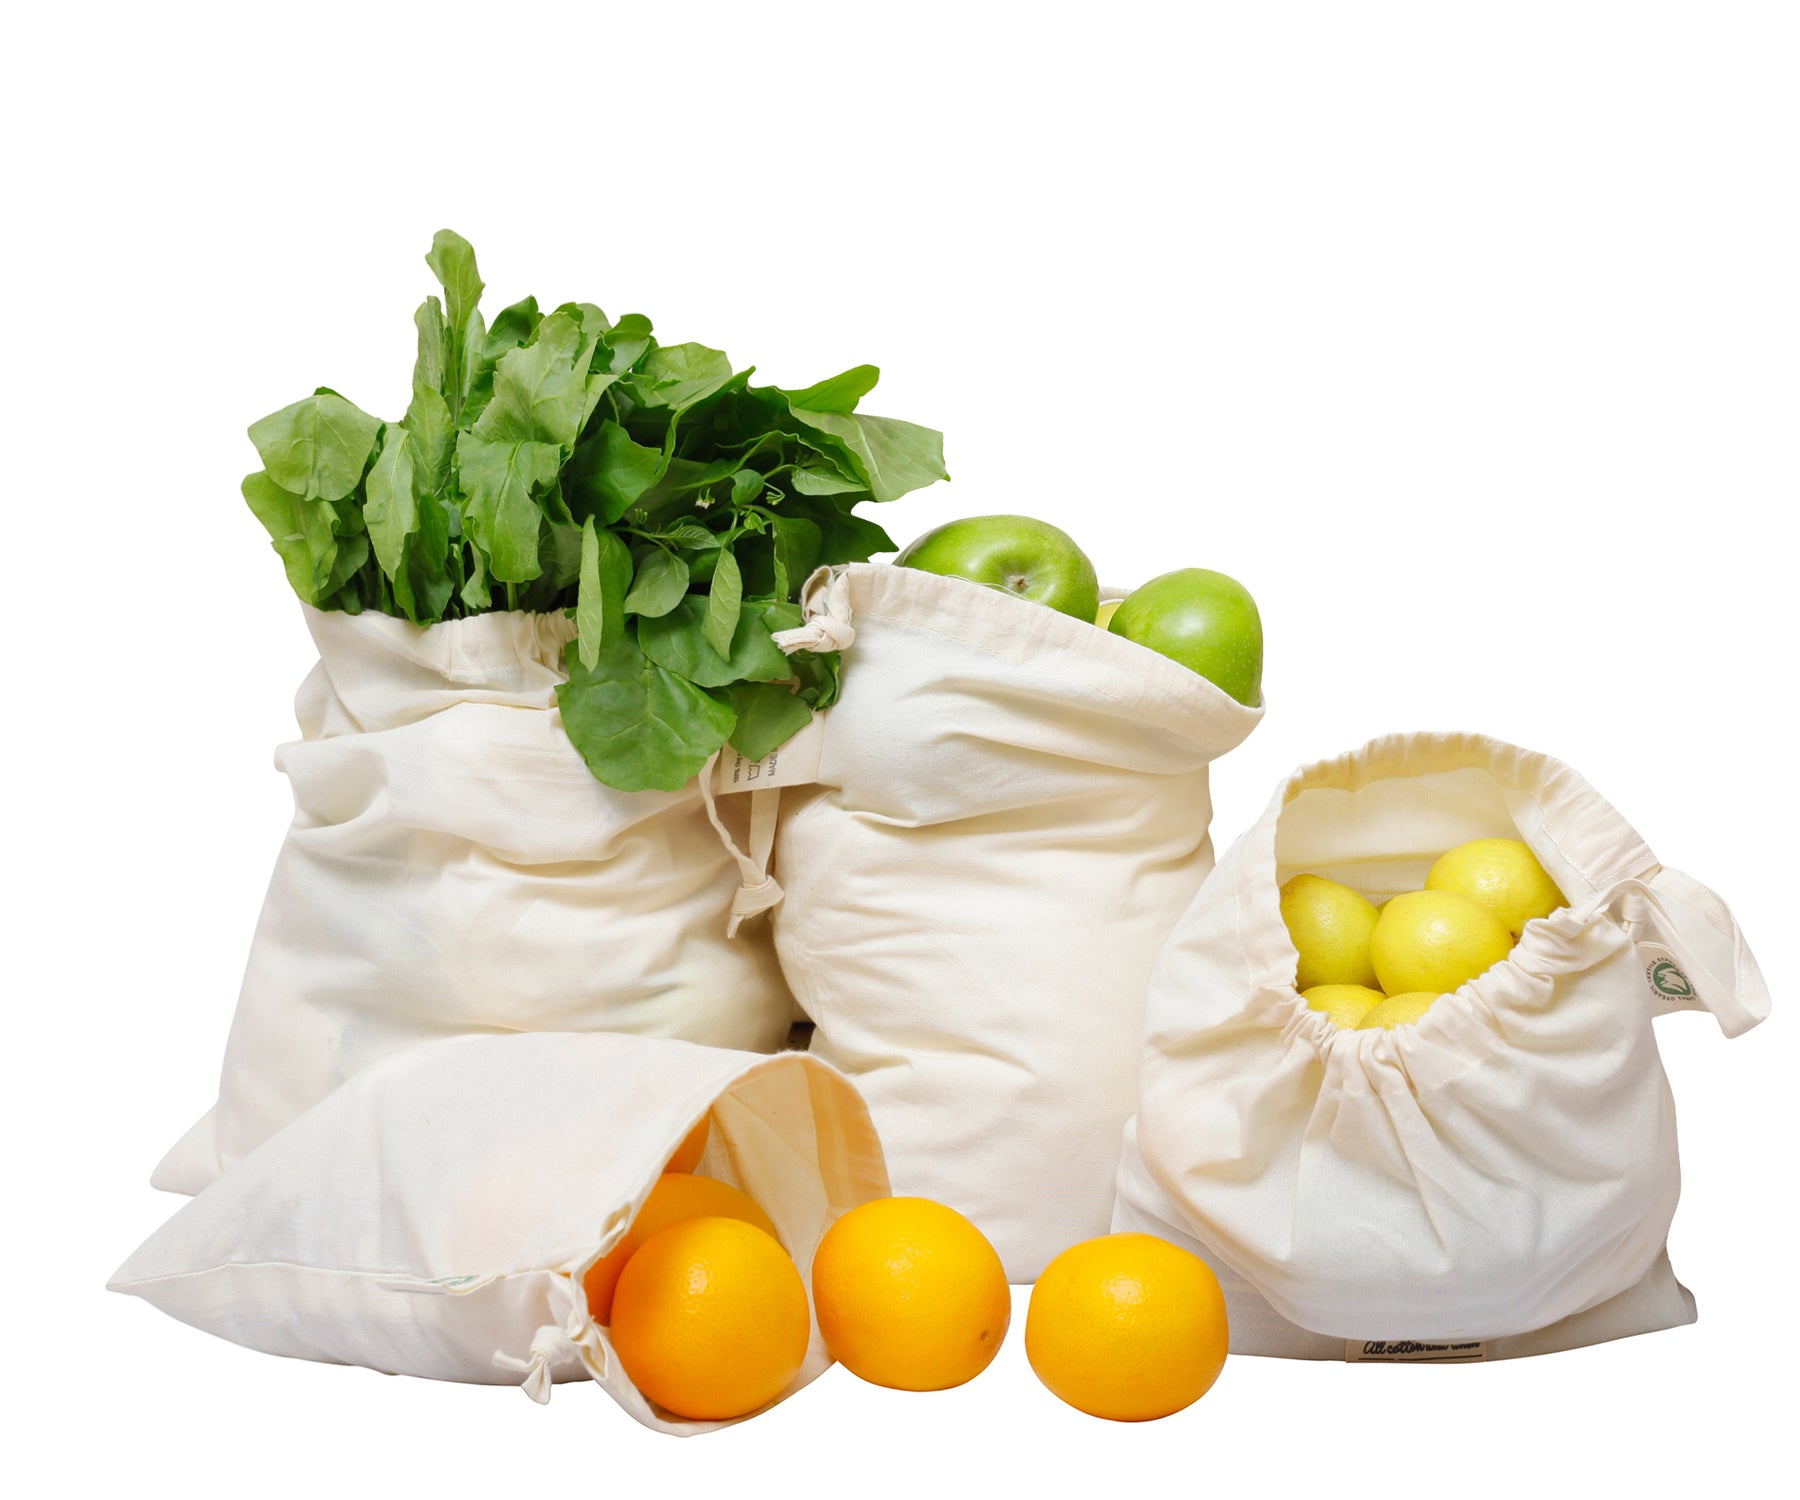 Opt for eco-friendly packaging and storage solutions with muslin drawstring bags, cotton muslin bags, cotton mesh produce bags, and reusable cotton produce bags. These choices promote sustainability, minimize waste, and contribute to a greener planet.